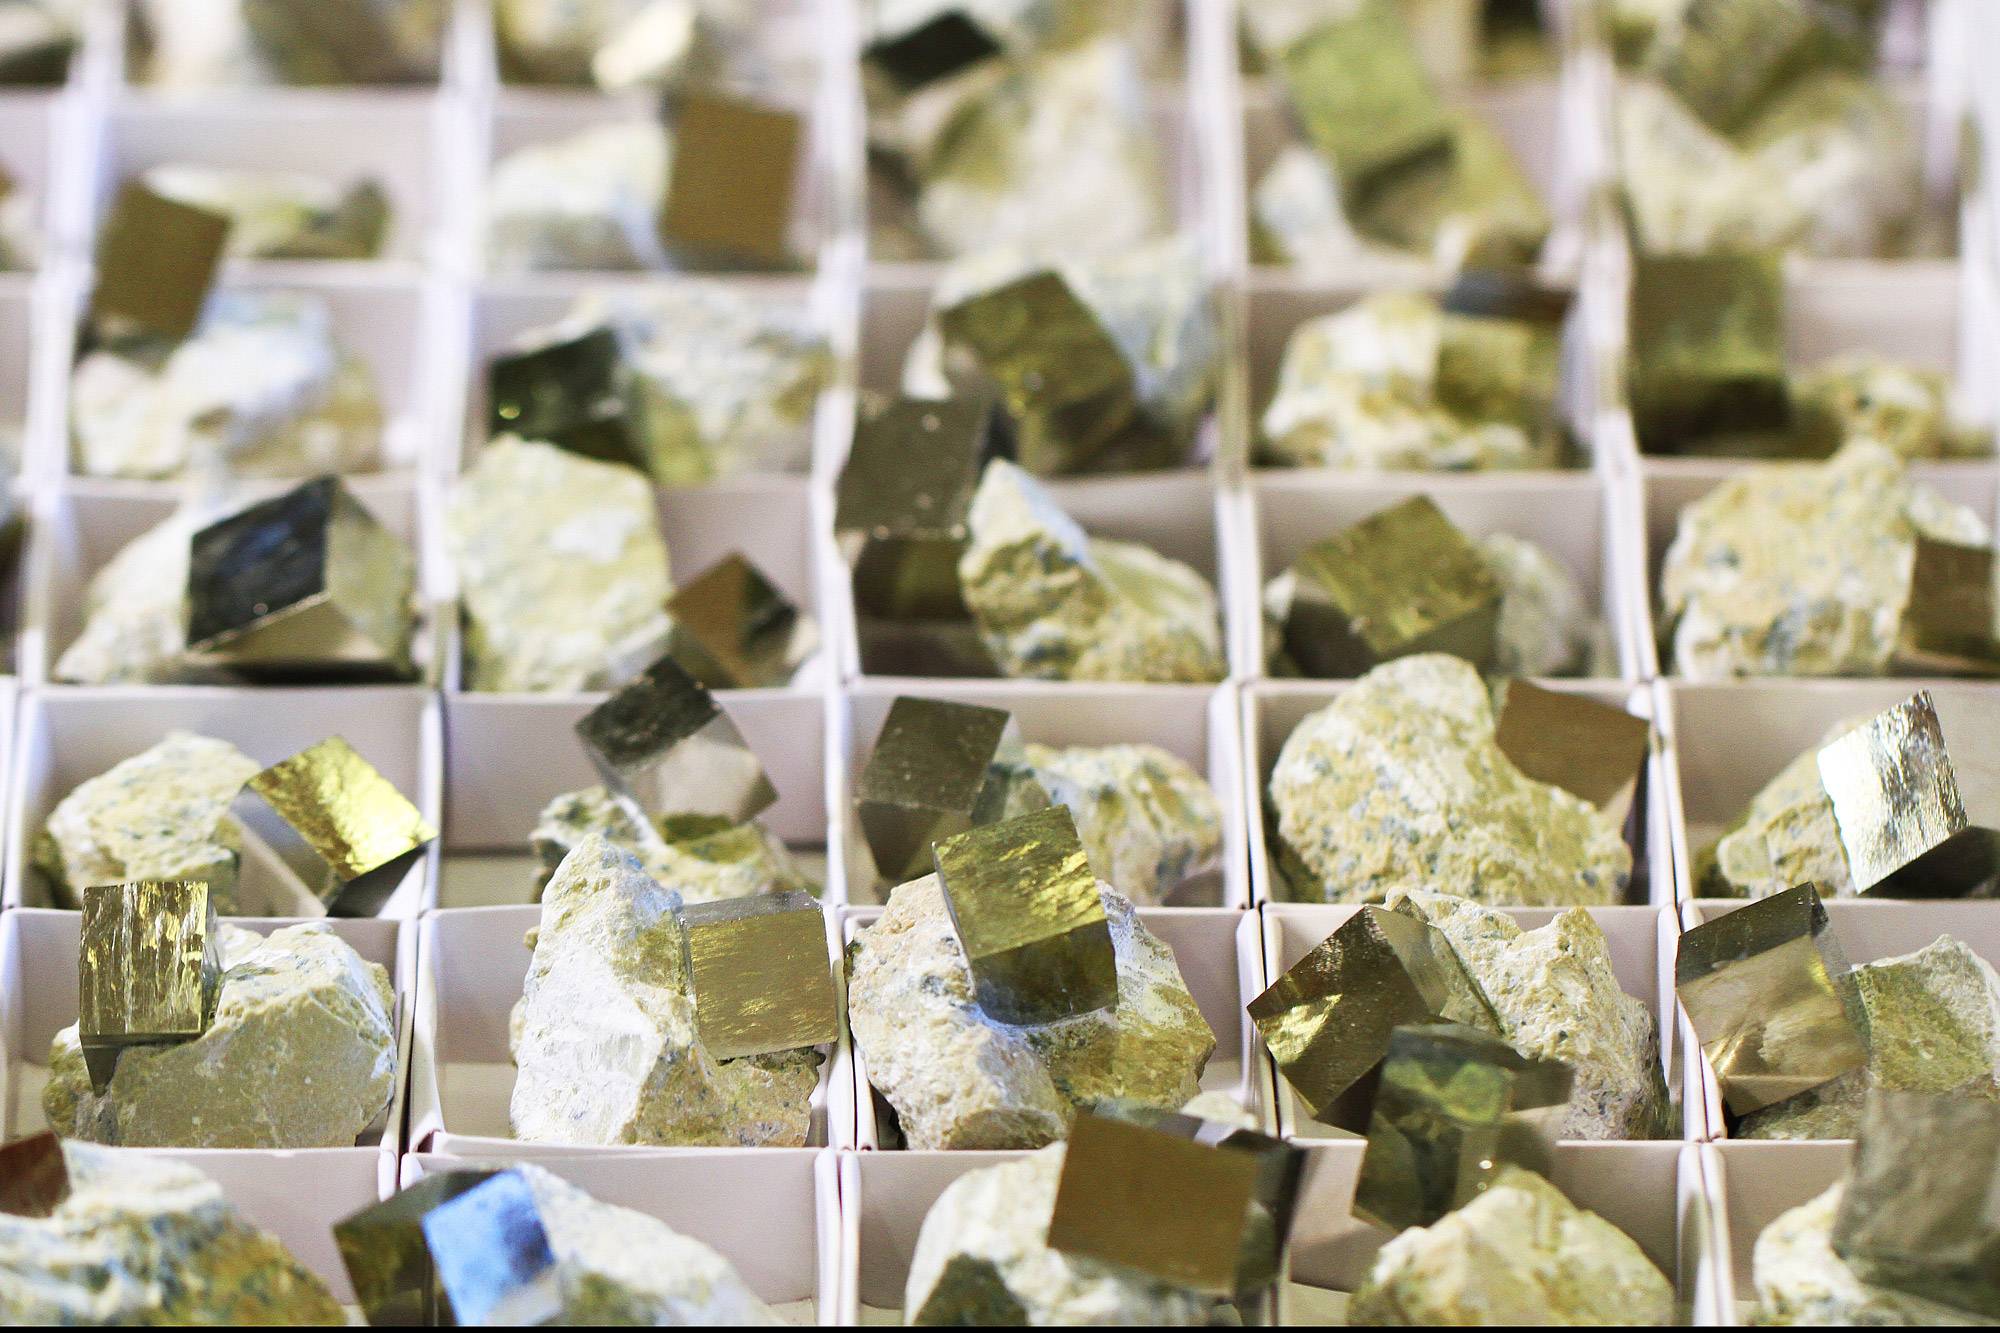 Collecting pyrite crystals and where to find the most beautiful ones!